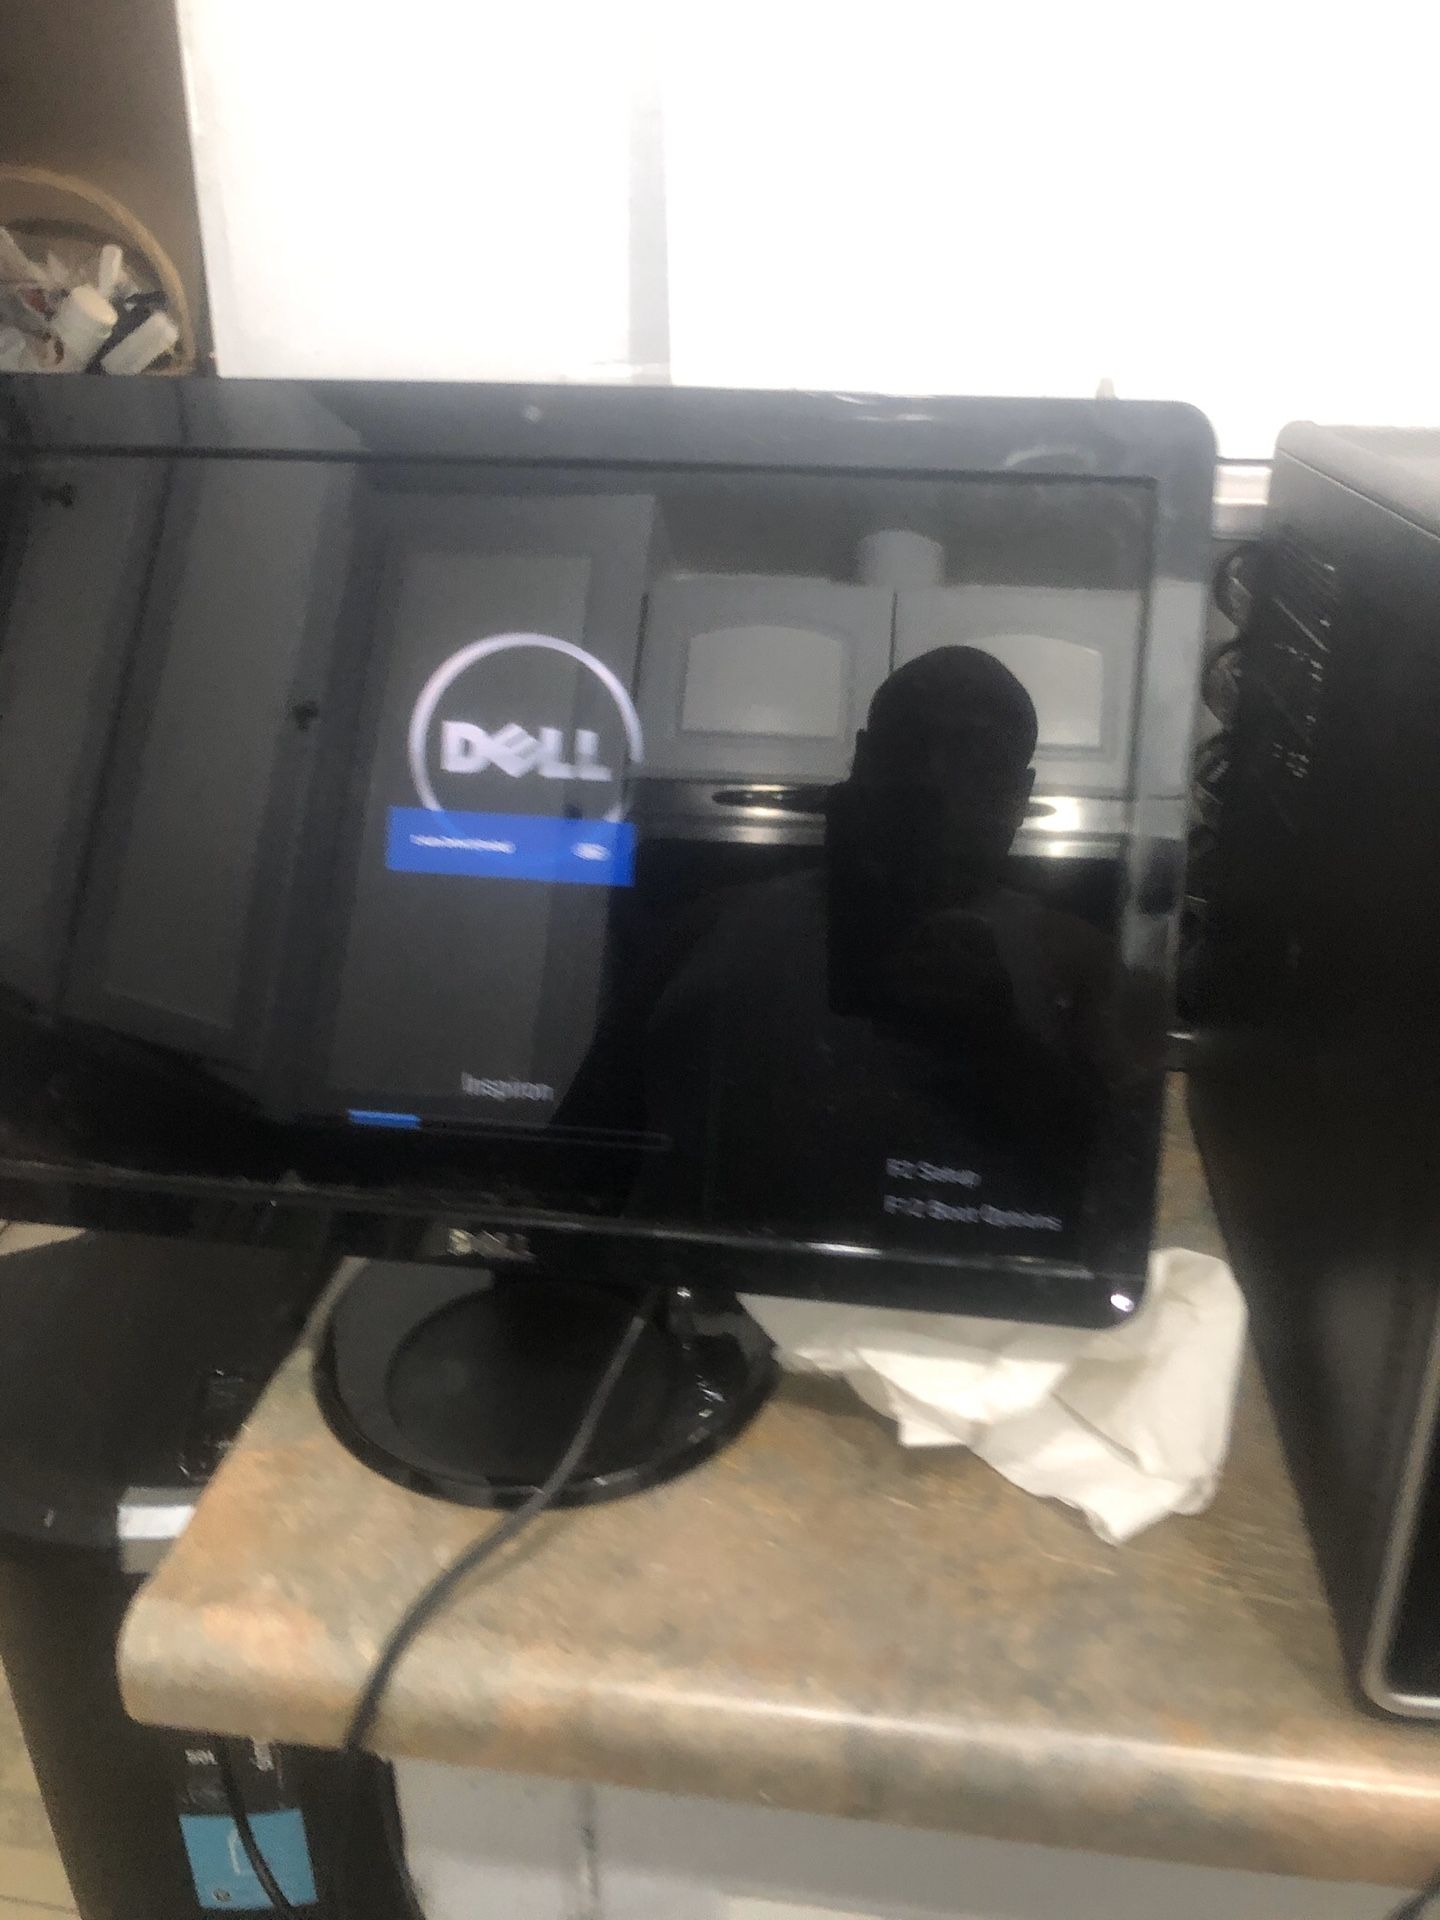 Dell computer with sound bar